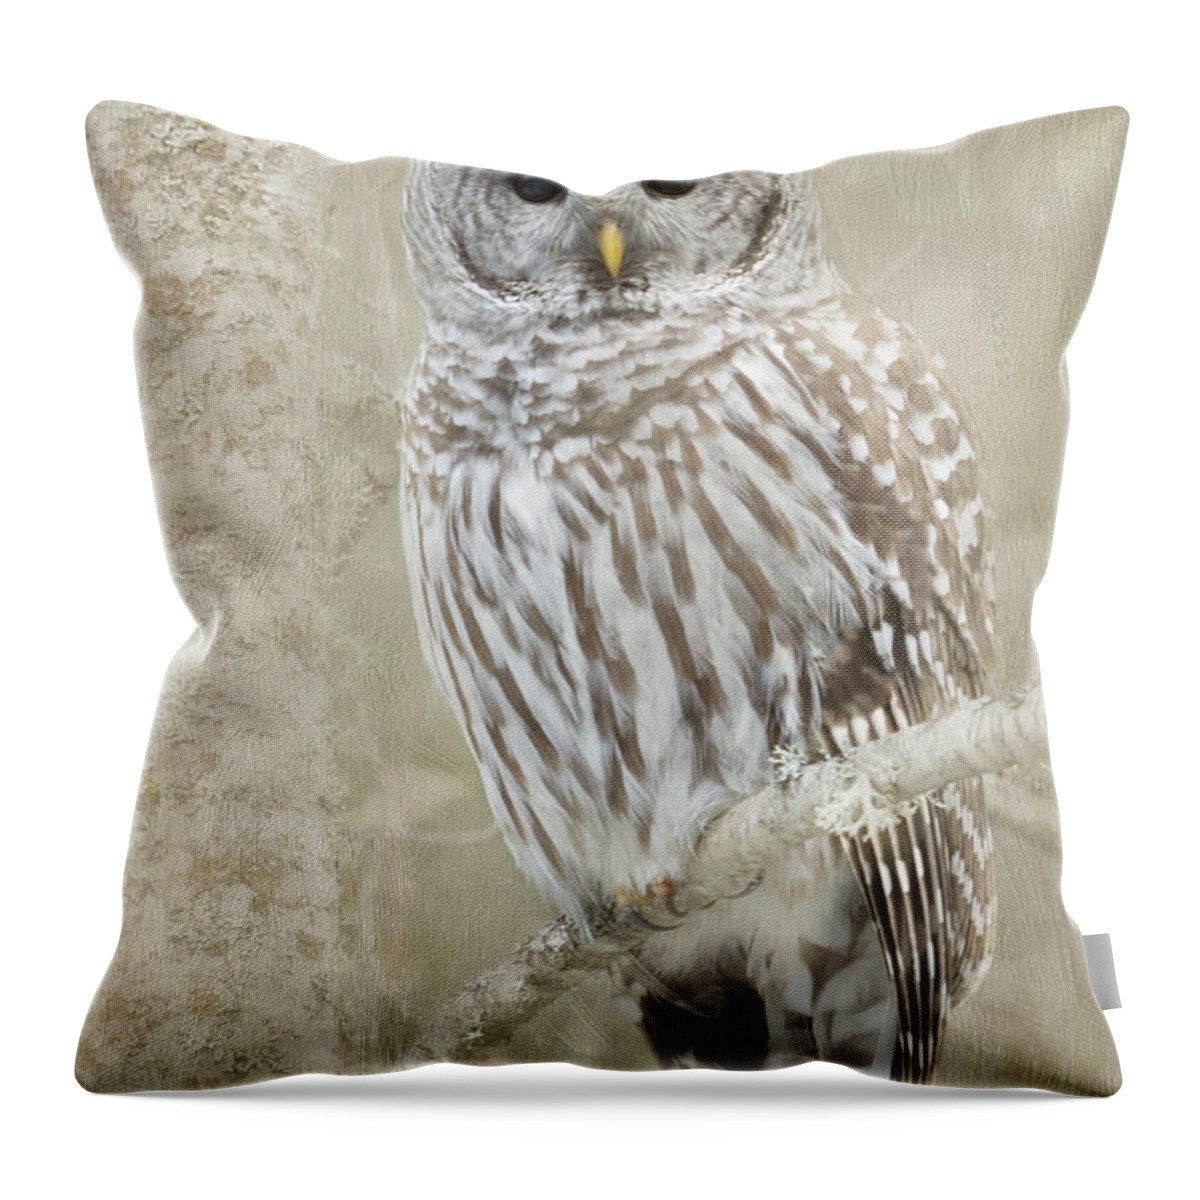 Barred Owl Throw Pillow featuring the photograph Hoot Hoot Hoot by Beve Brown-Clark Photography